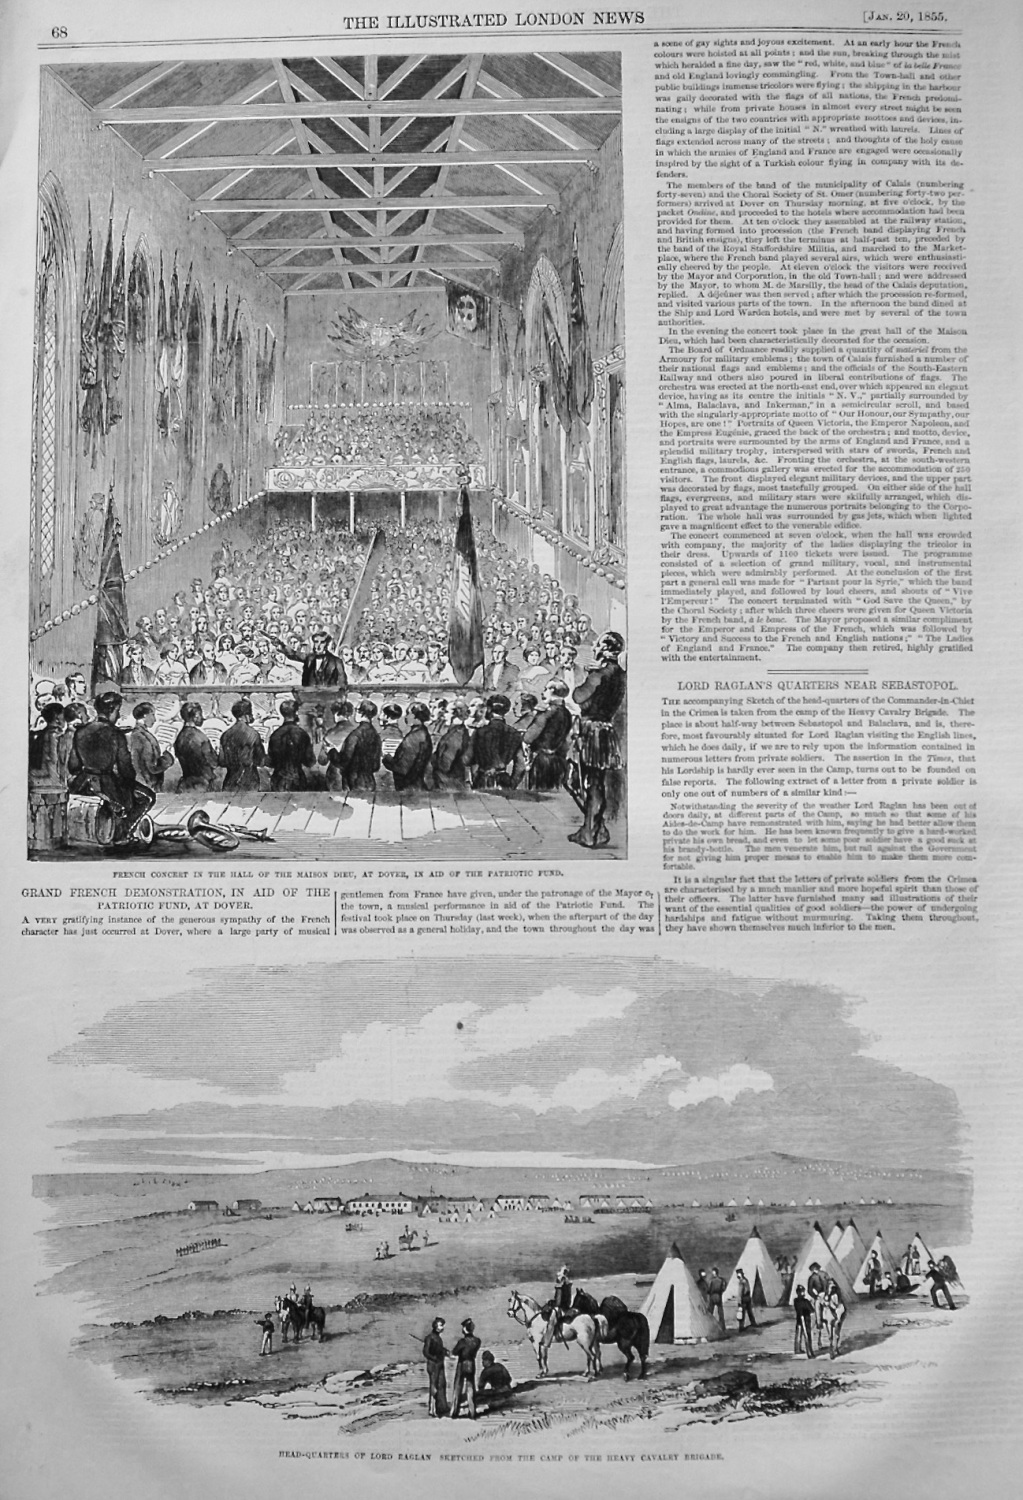 Grand French Demonstration, in Aid of the Patriotic Fund, at Dover. 1855